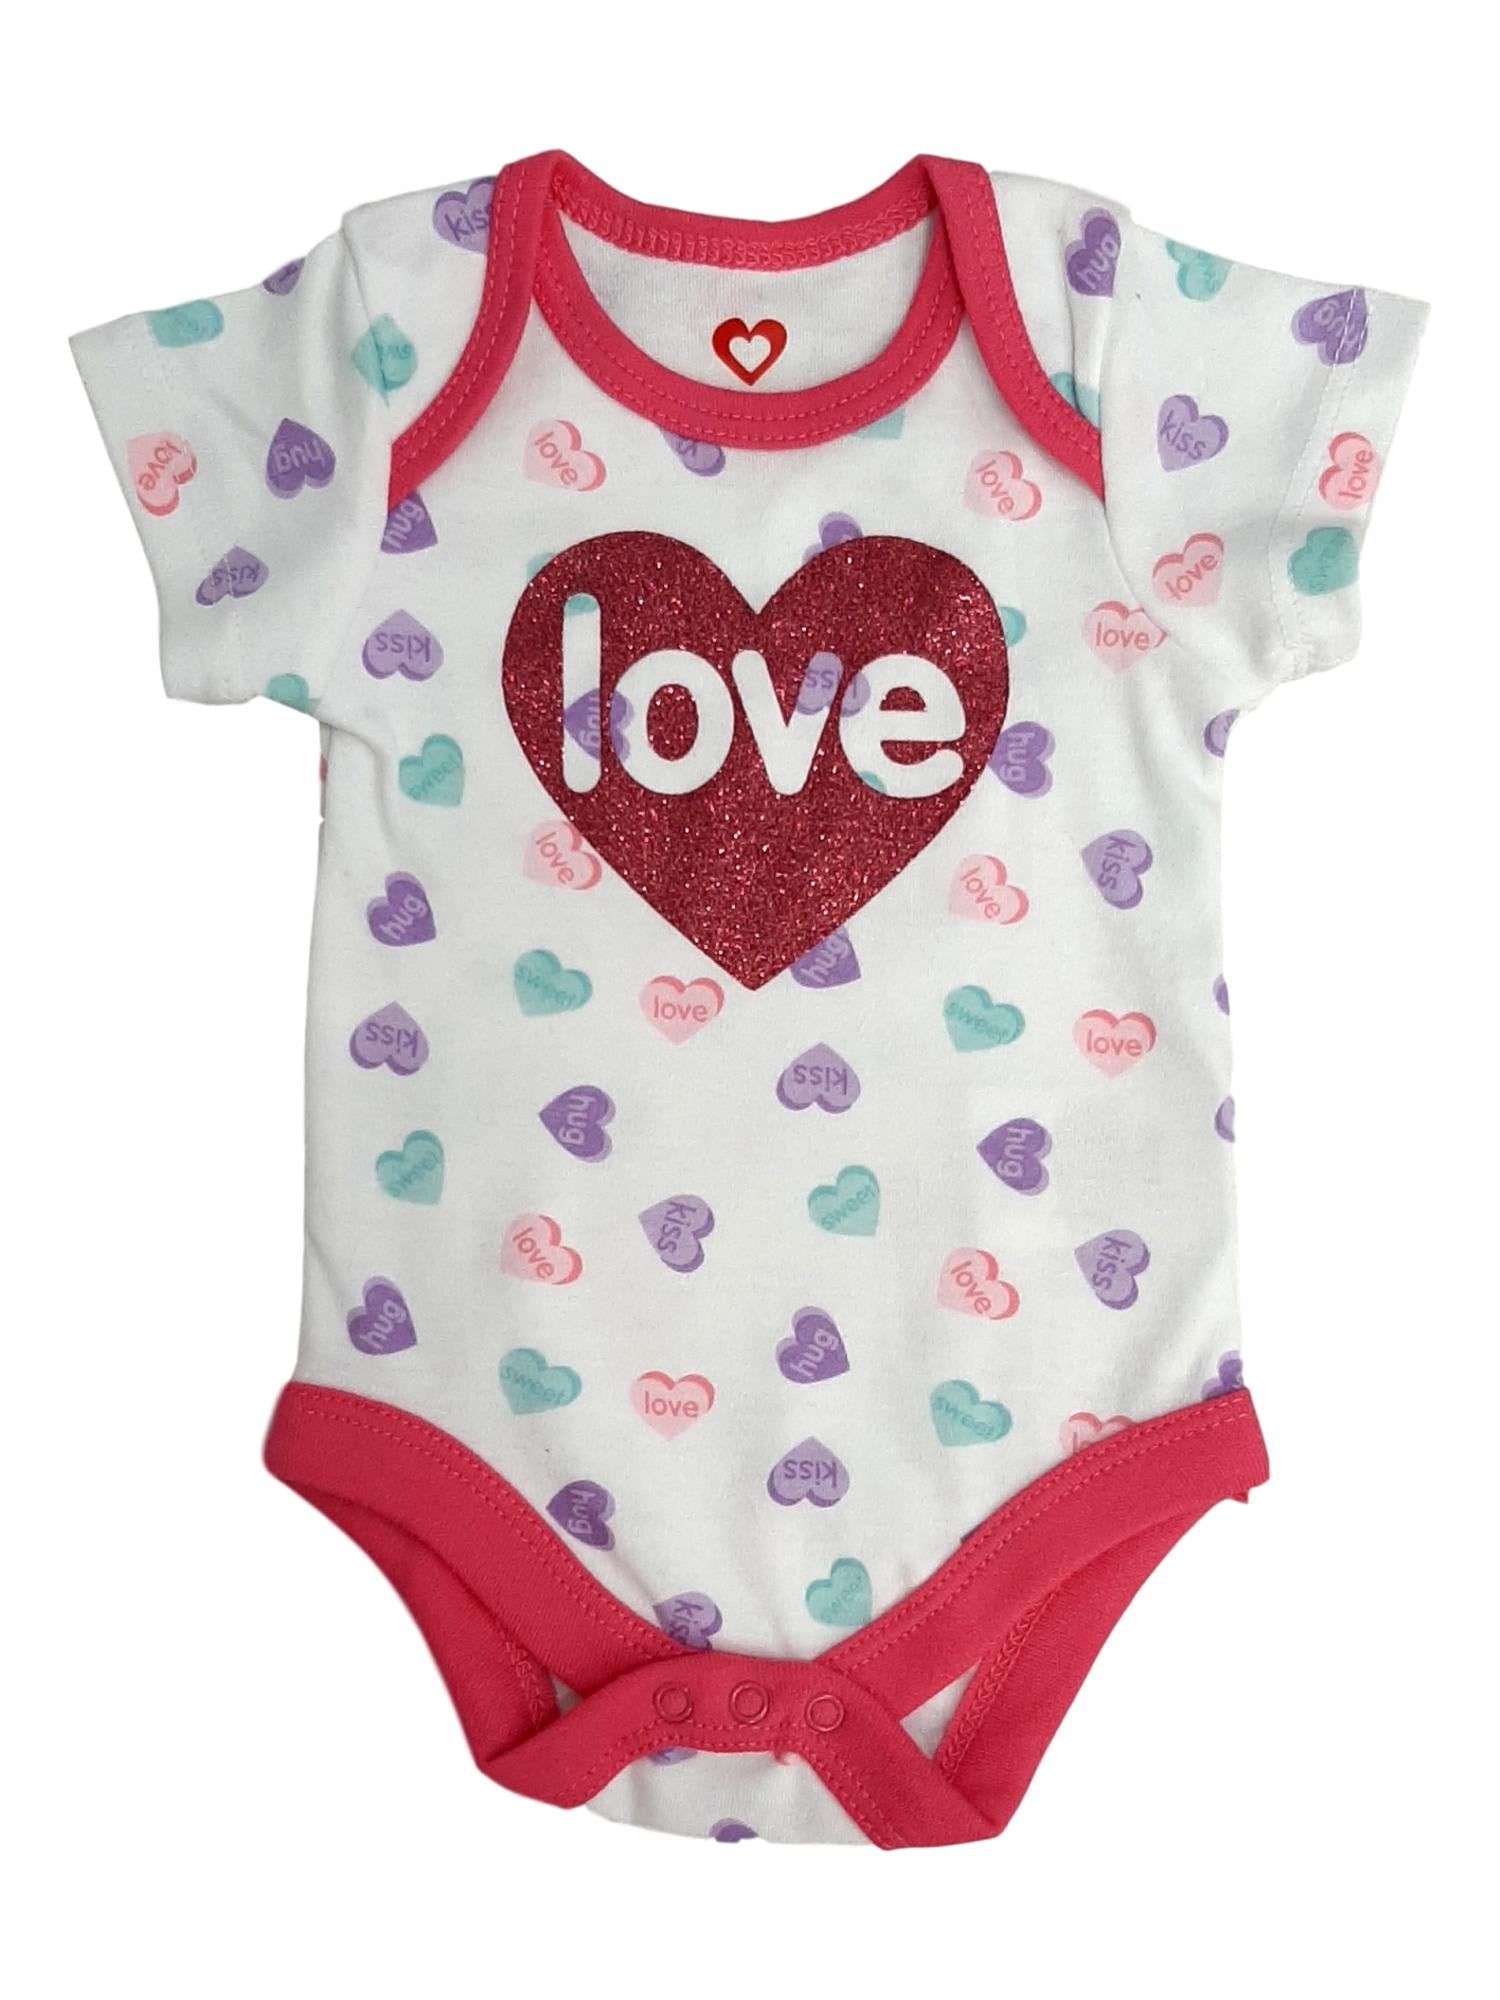 Guilty of Stealing Hearts Baby Shower Gift Little Heart Breaker Infant Girl Boy Onesies® Bodysuit First Valentine’s Day Outfit